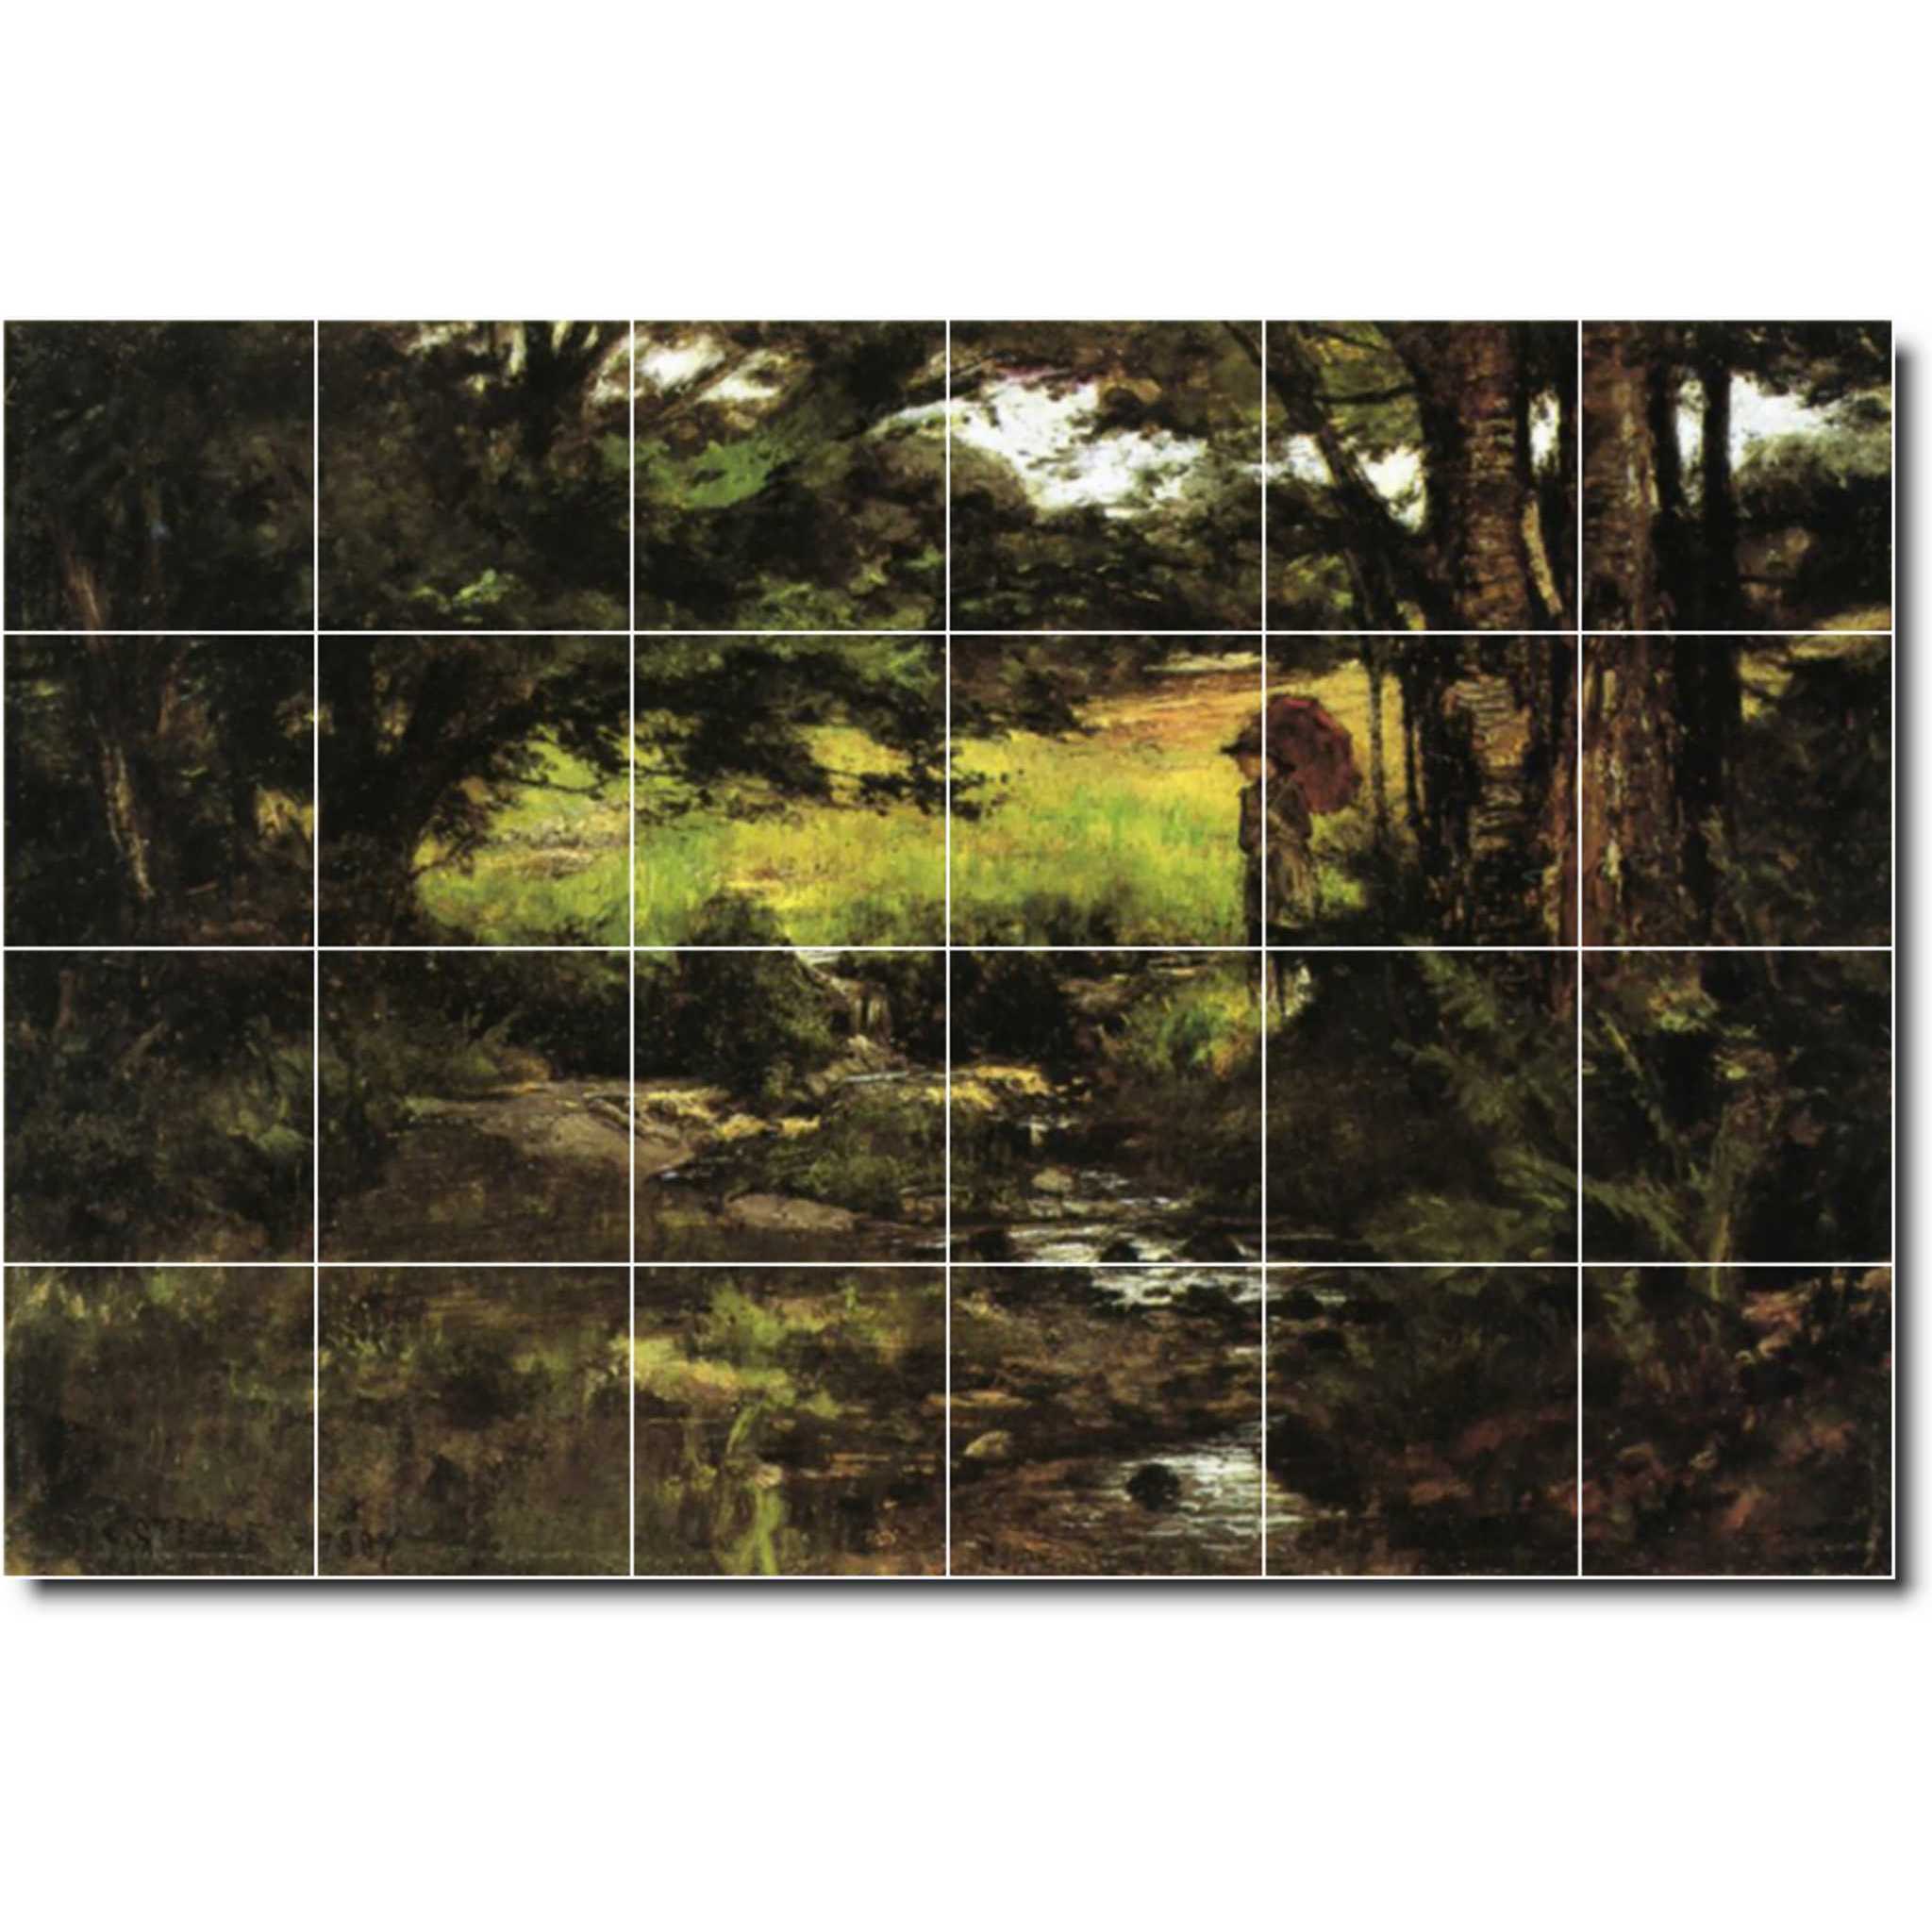 theodore steele country painting ceramic tile mural p08363